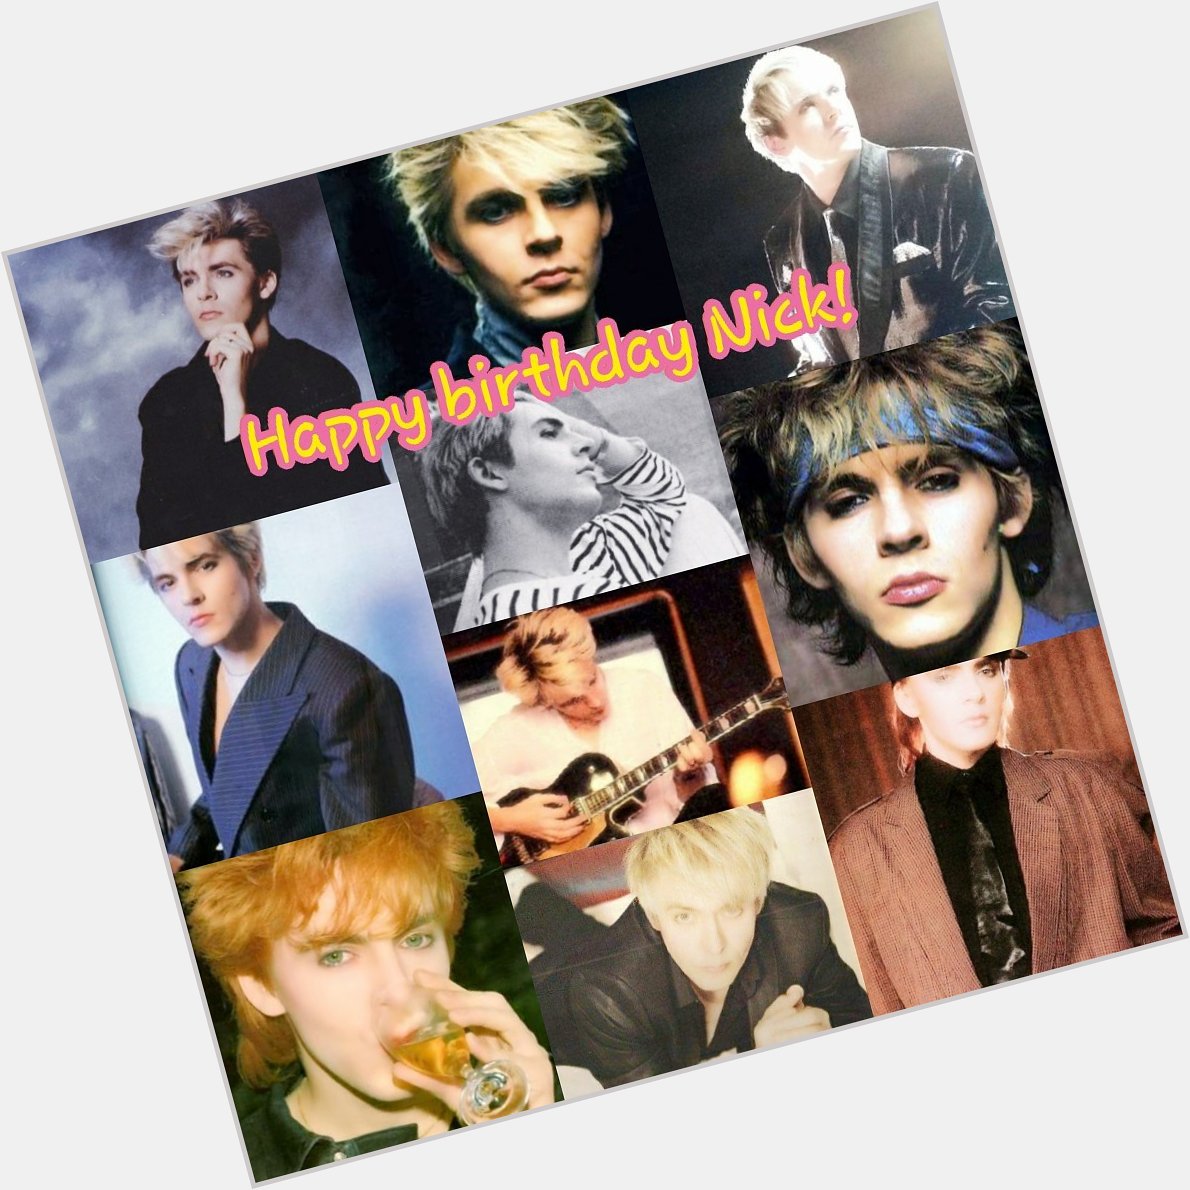 Happy birthday to \s Nick Rhodes. Have a durantastic day! 